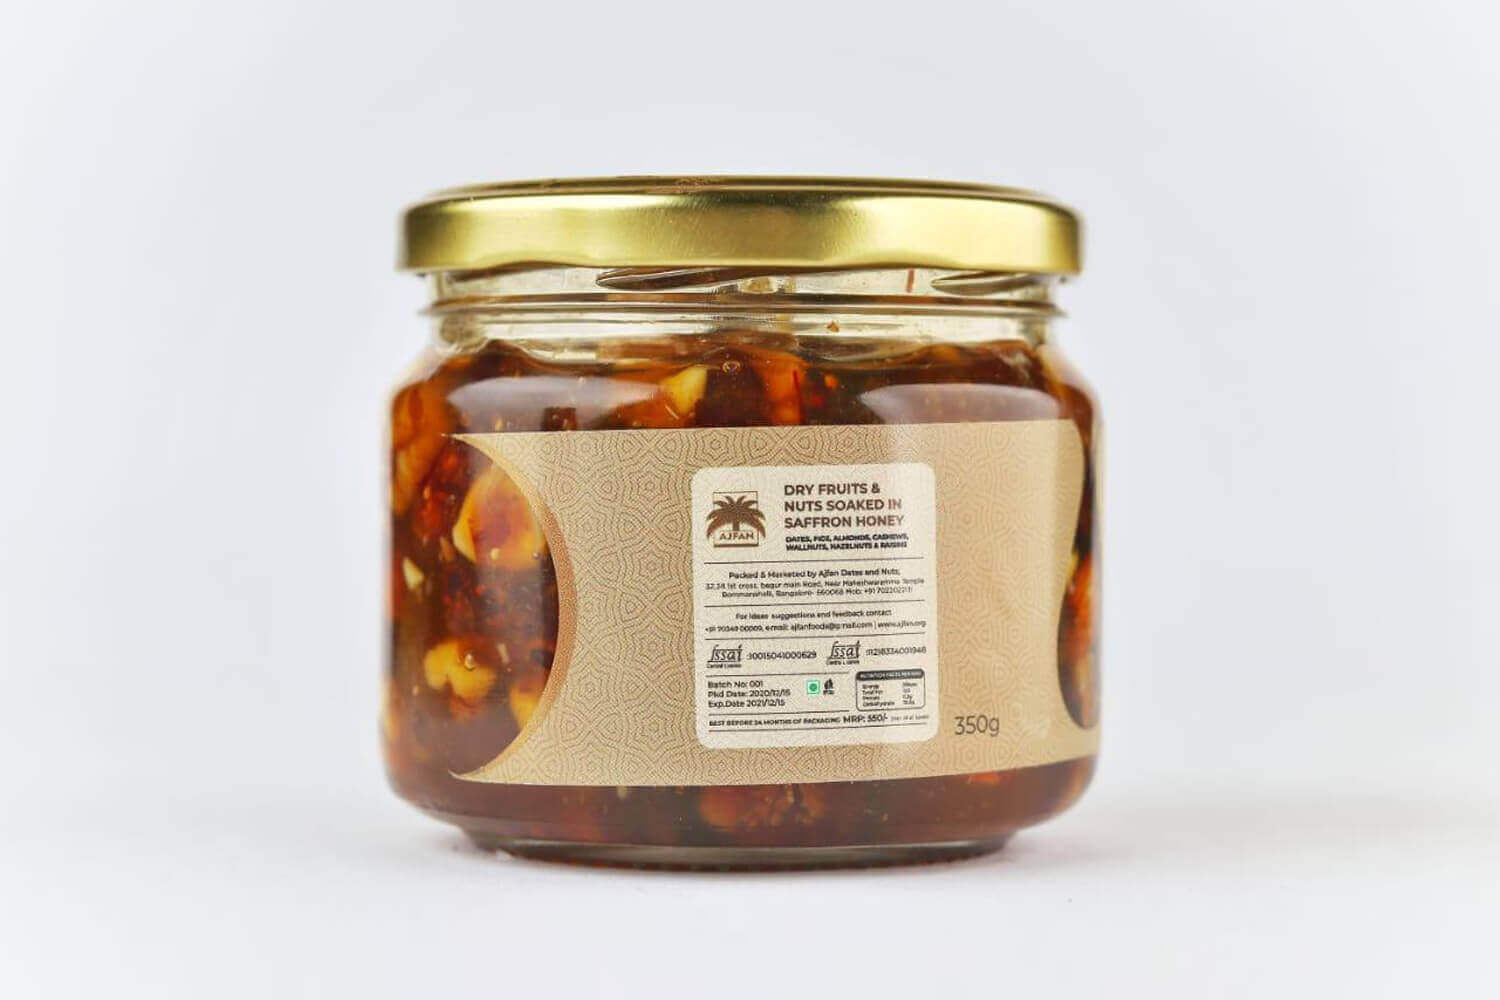 Dry Fruits & Nuts Soaked In Saffron Honey – Cherrypick